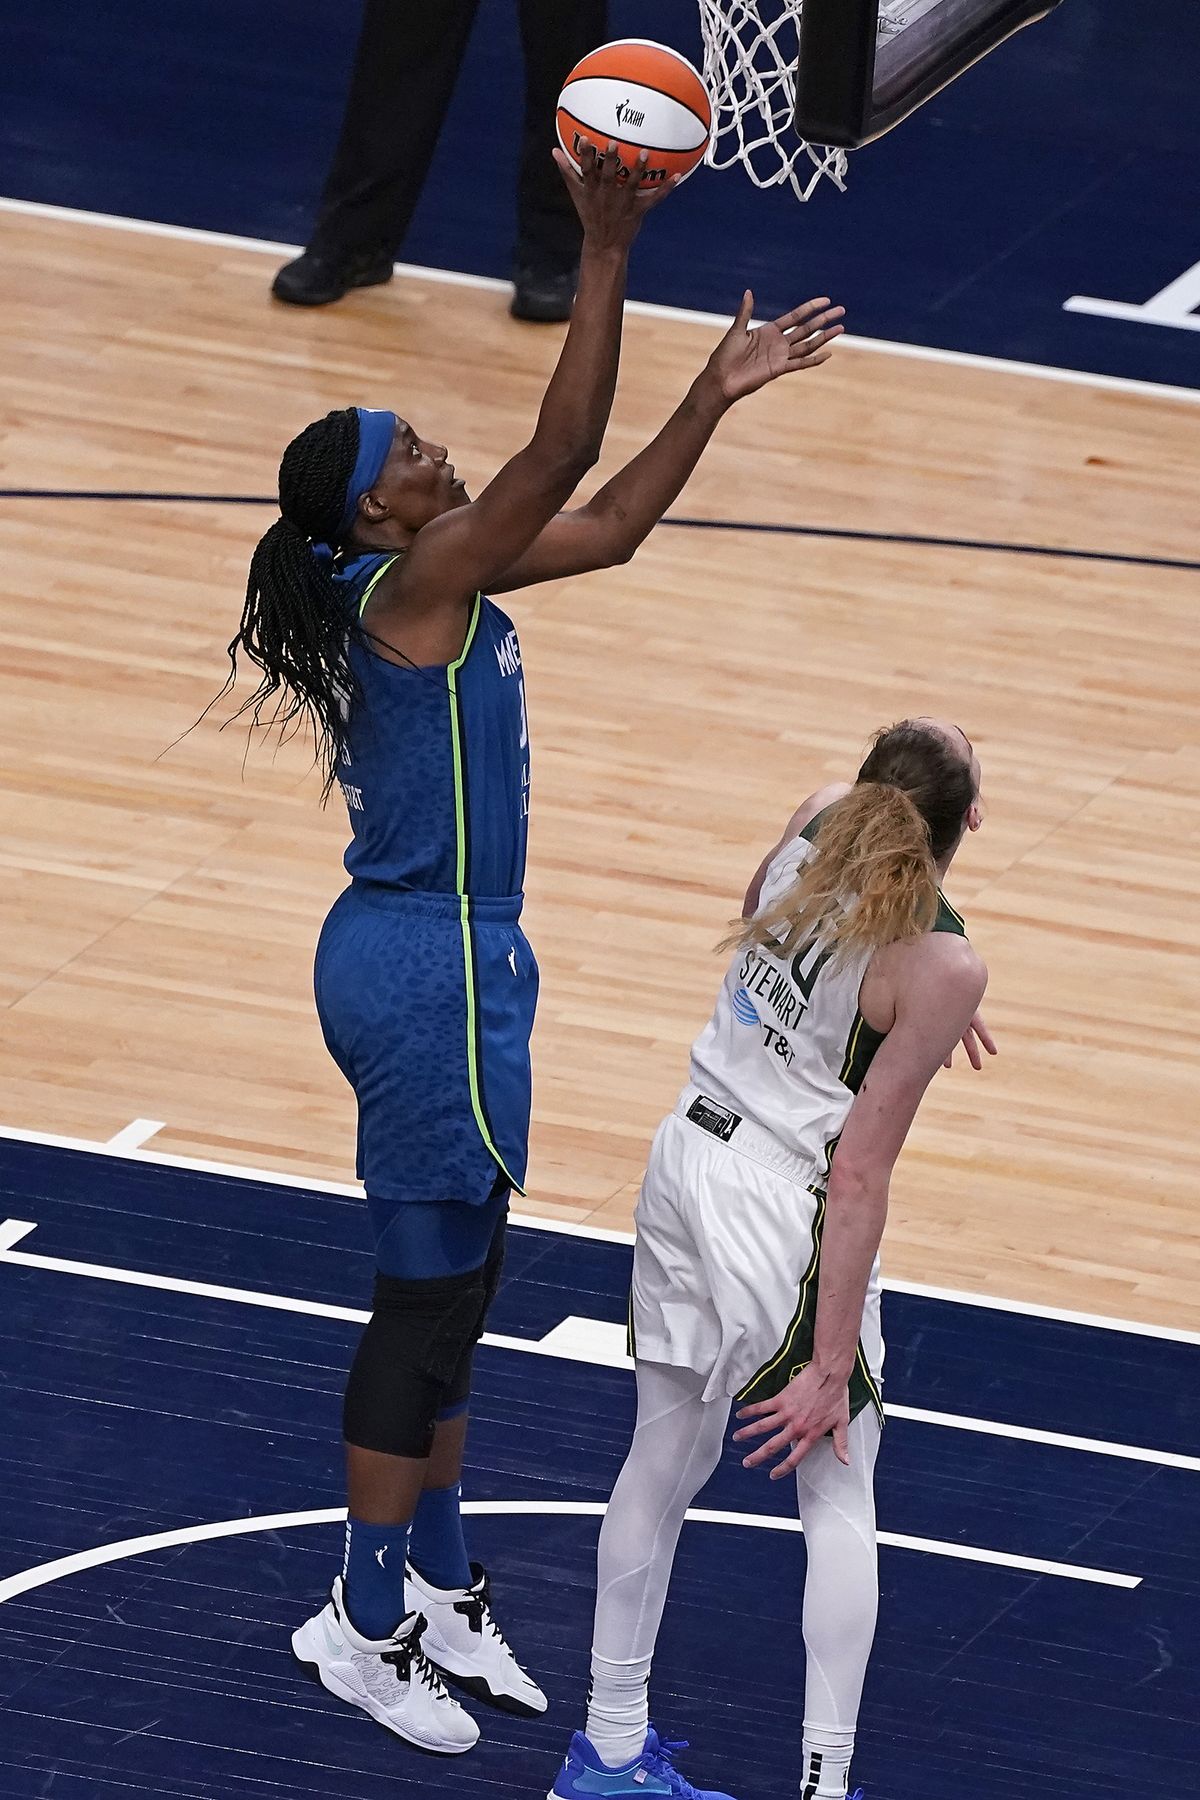 Minnesota Lynx center Sylvia Fowles (34) scorea against Seattle Storm forward Breanna Stewart (30) during the first quarter of a WNBA basketball game Thursday, May 20, 2021, in Minneapolis.  (Associated Press)